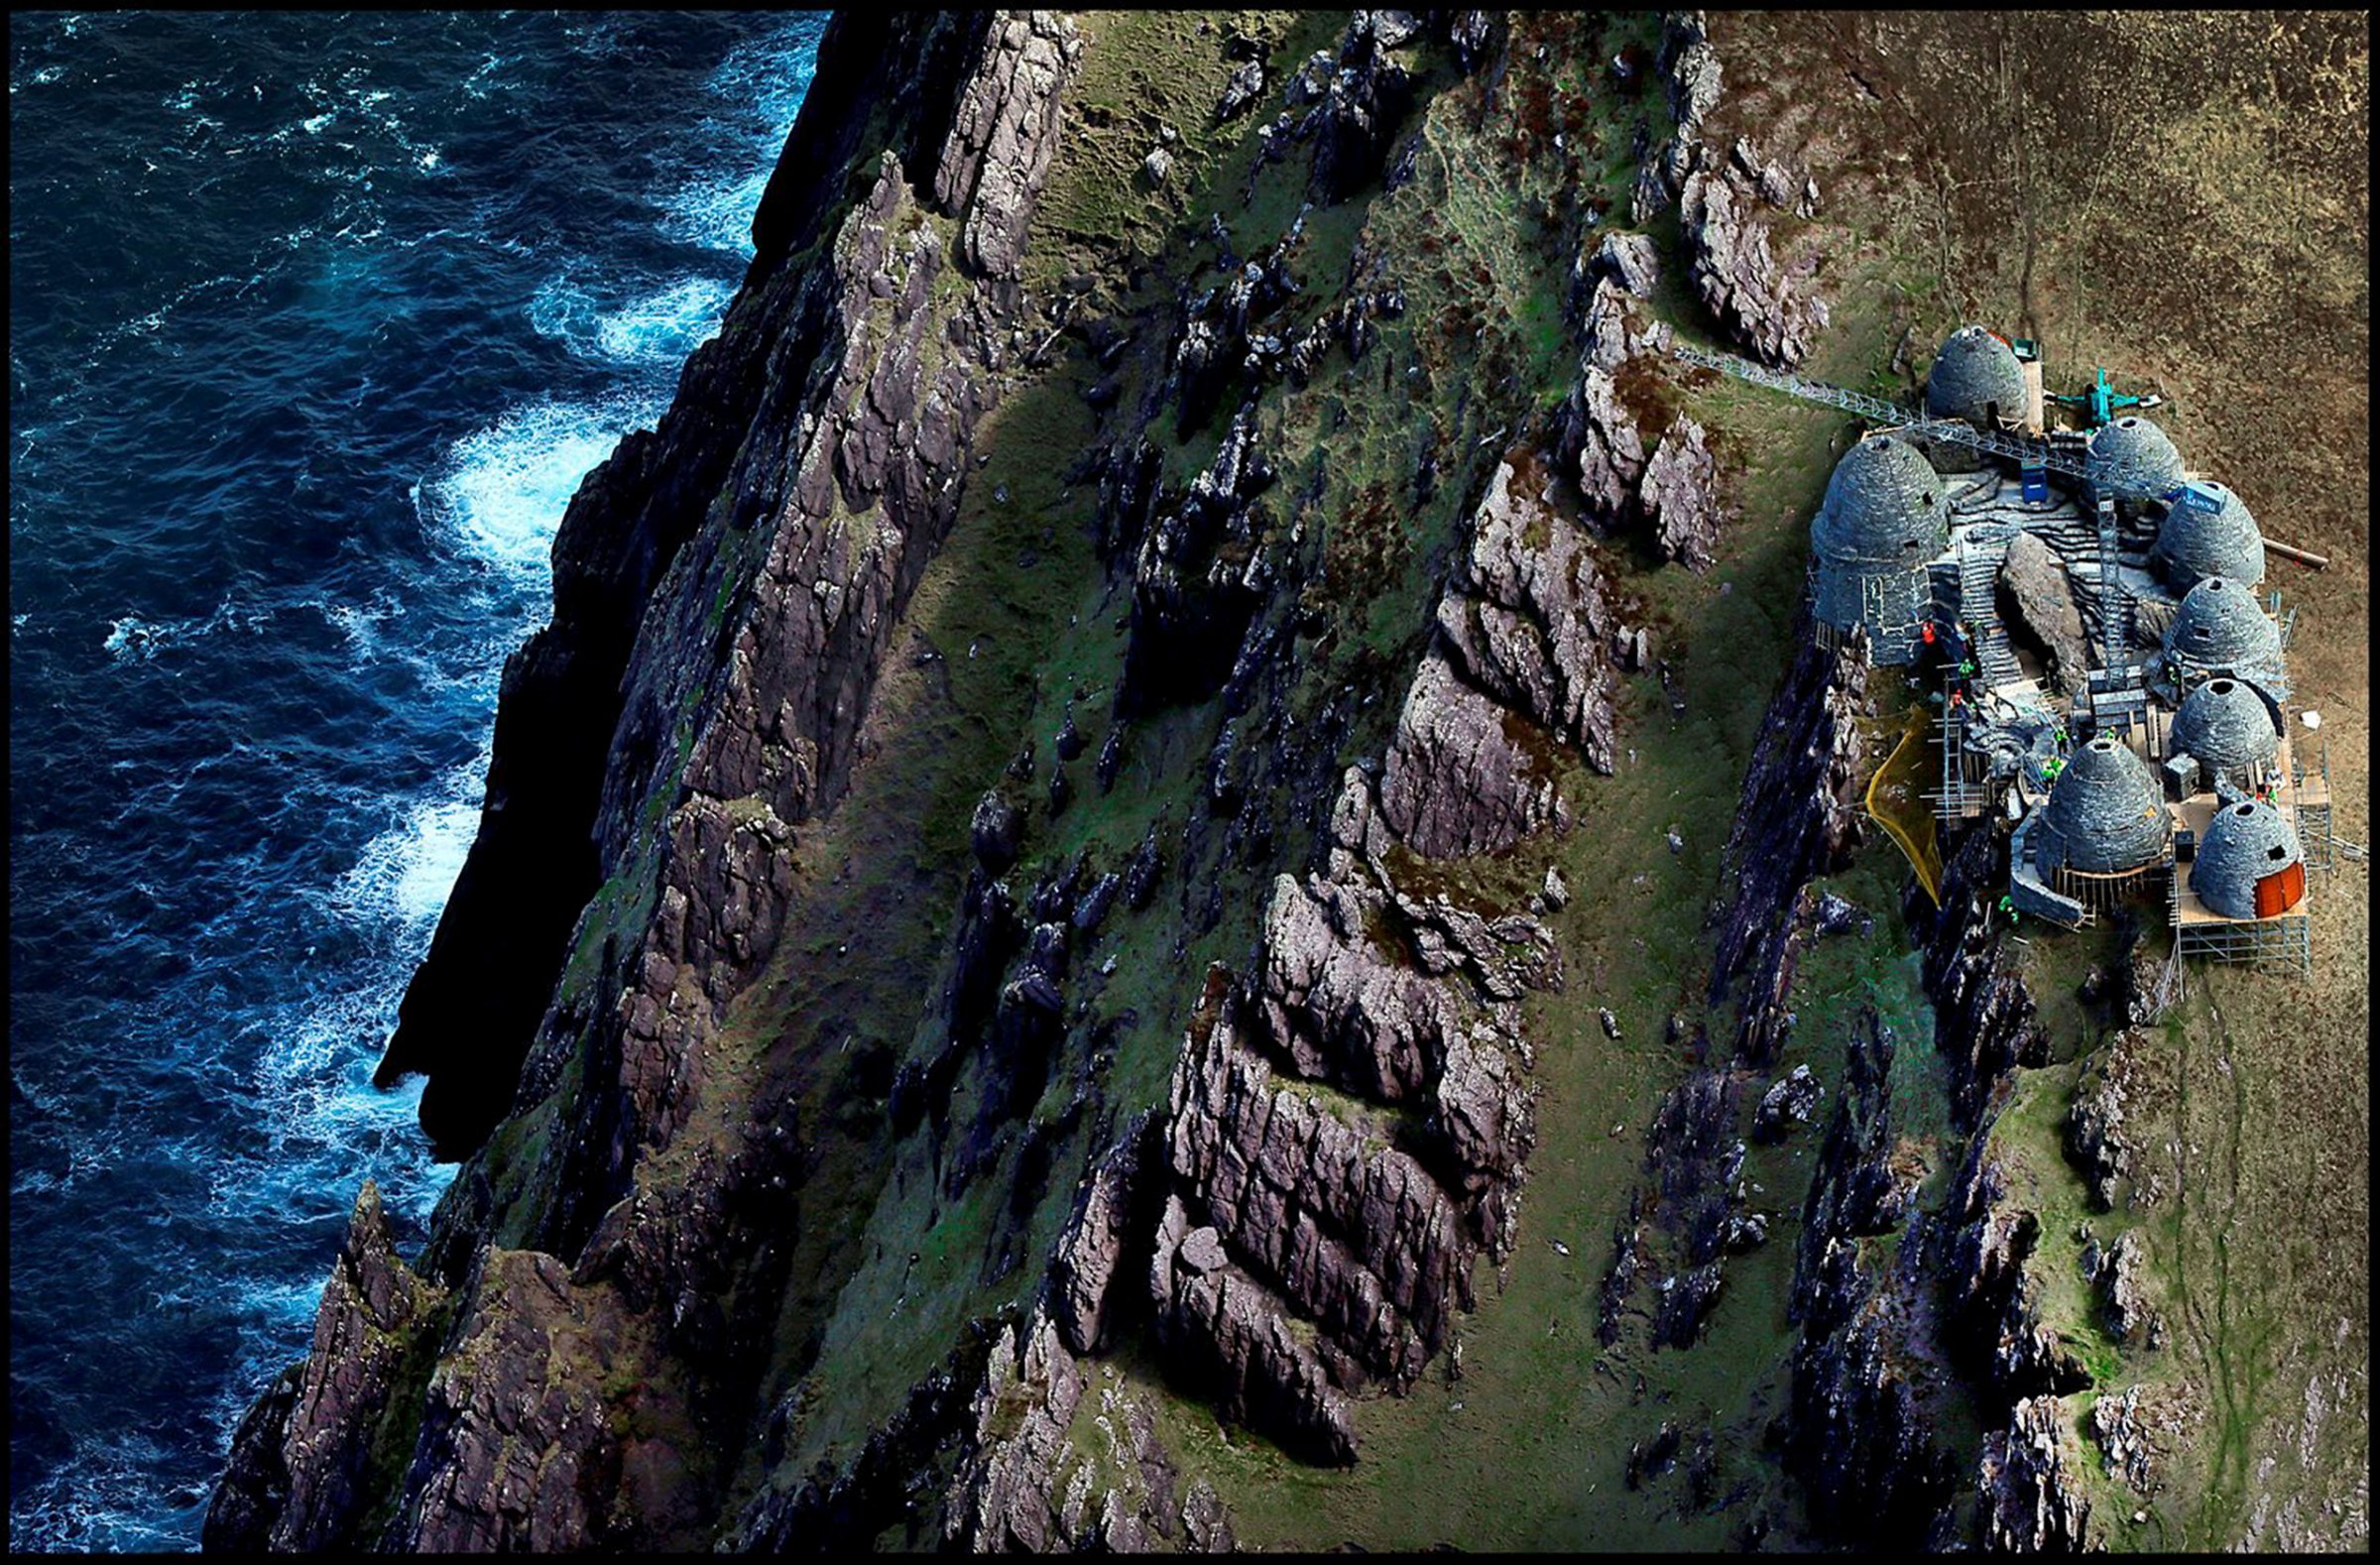 A replica of the sixth-century monastic settlement has been recreated on top of Ceann Sibéal on the Dingle Peninsula in Ireland's Co Kerry, ahead of "Star Wars" filming, April 30, 2016. The site, which includes eight beehive huts, is supposed to be the planet Ahch-To, home to the first Jedi temple where Luke Skywalker has been in exile, and is just one of several locations being used along the western Ireland seaboard.